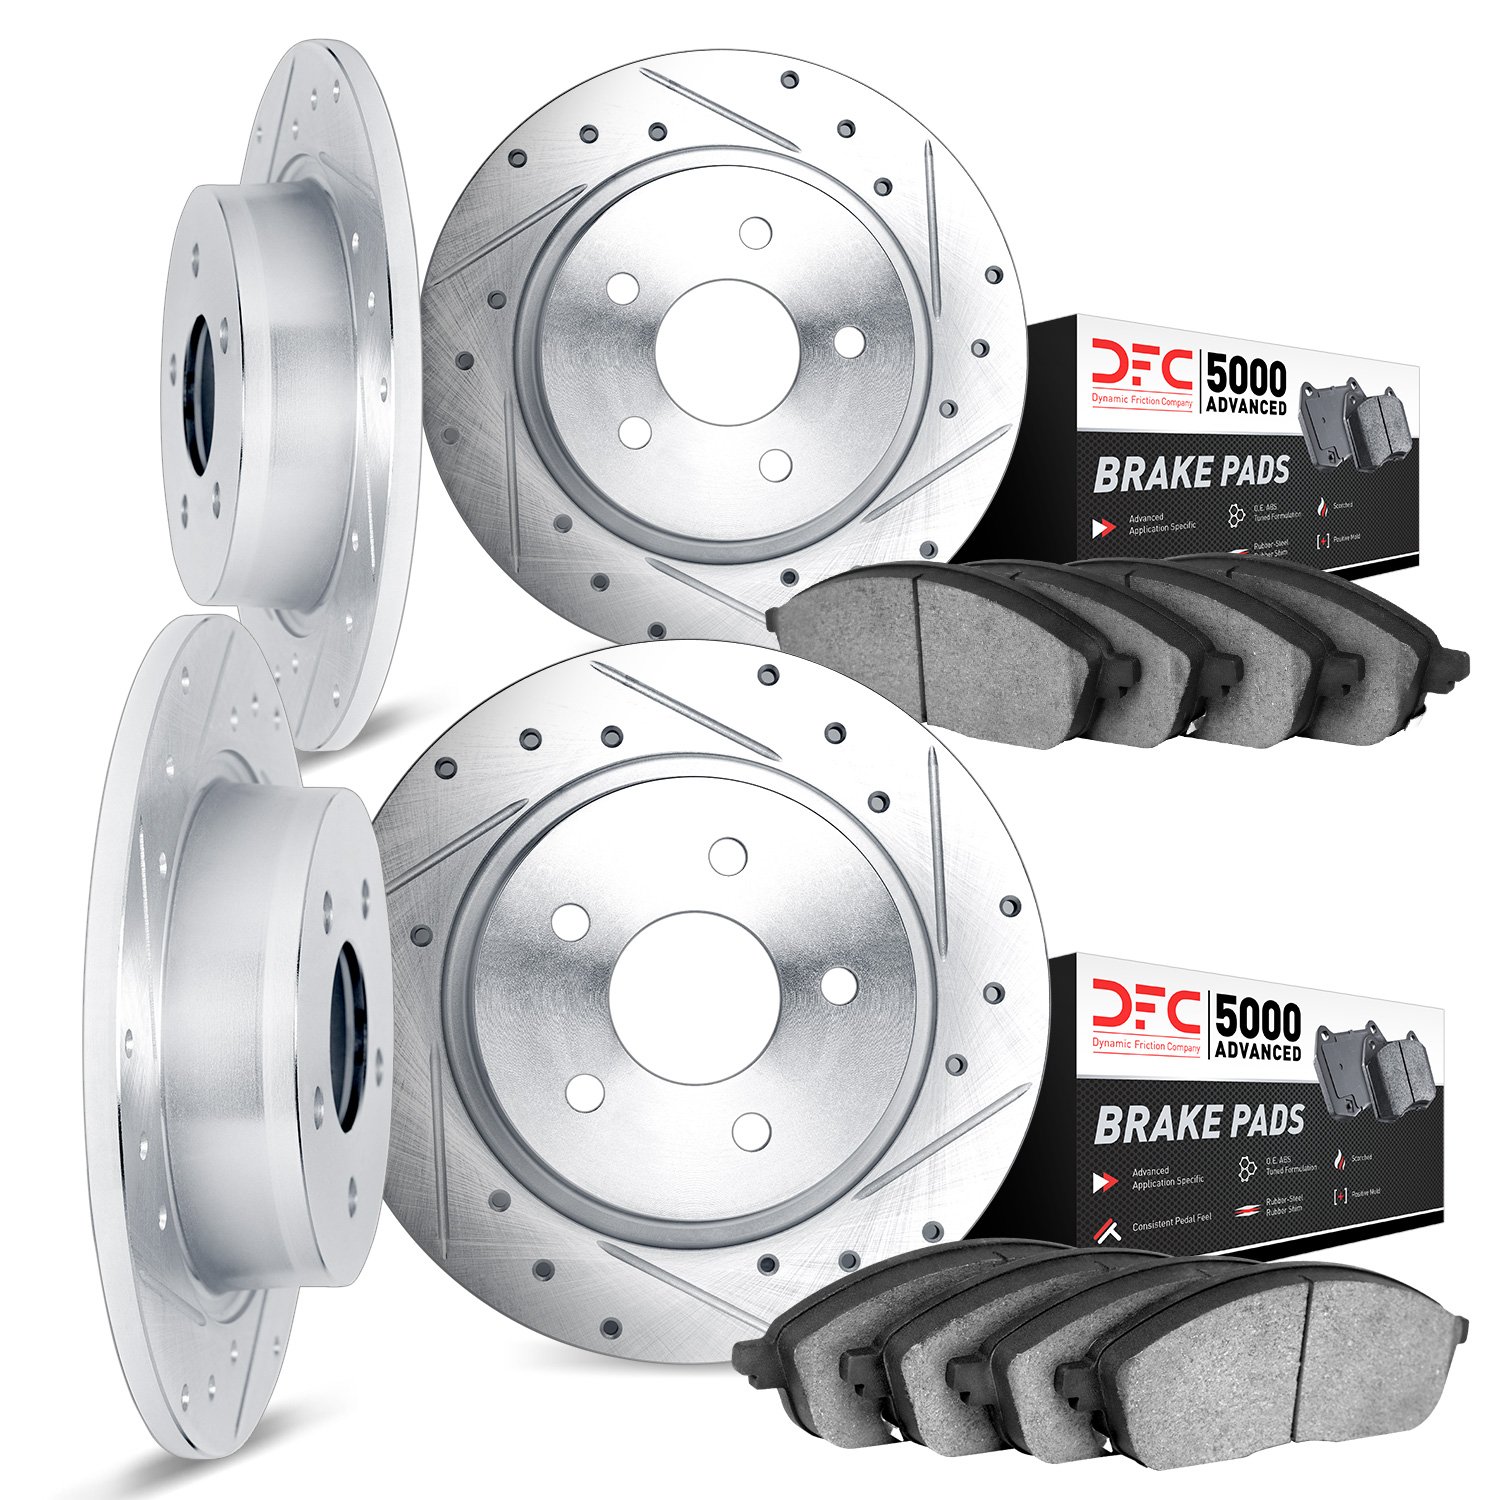 7504-11002 Drilled/Slotted Brake Rotors w/5000 Advanced Brake Pads Kit [Silver], 1974-1974 Land Rover, Position: Front and Rear